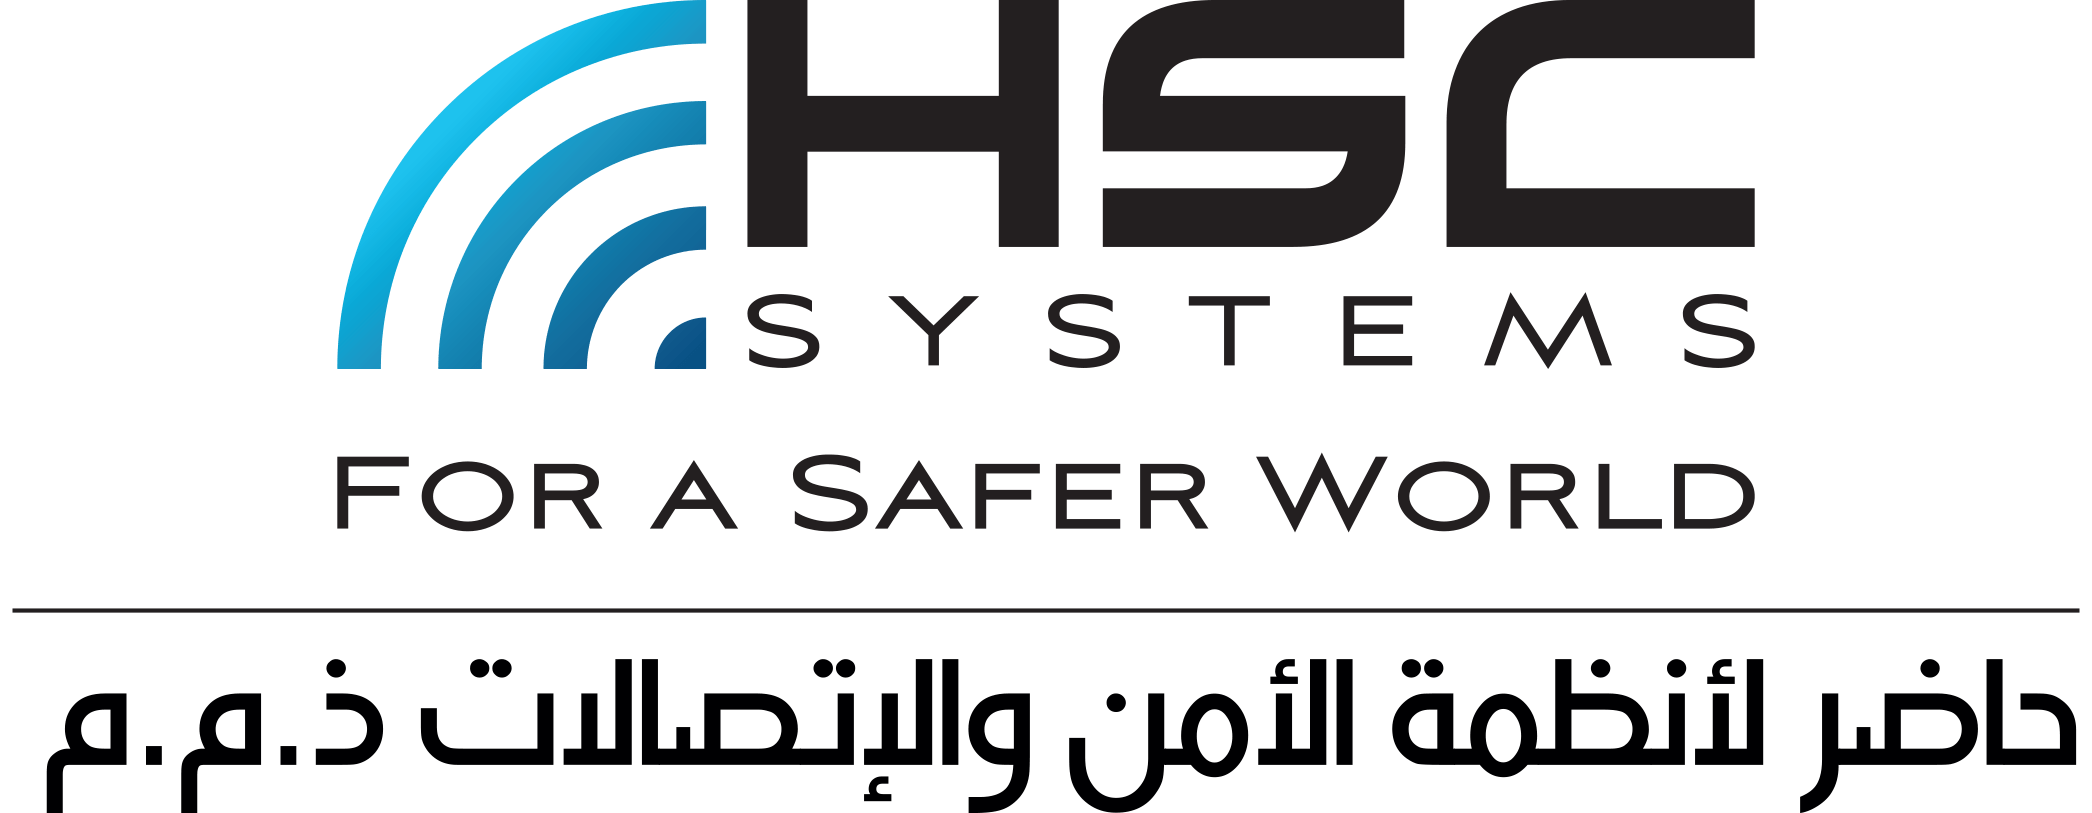 Hader Security & Communications Systems